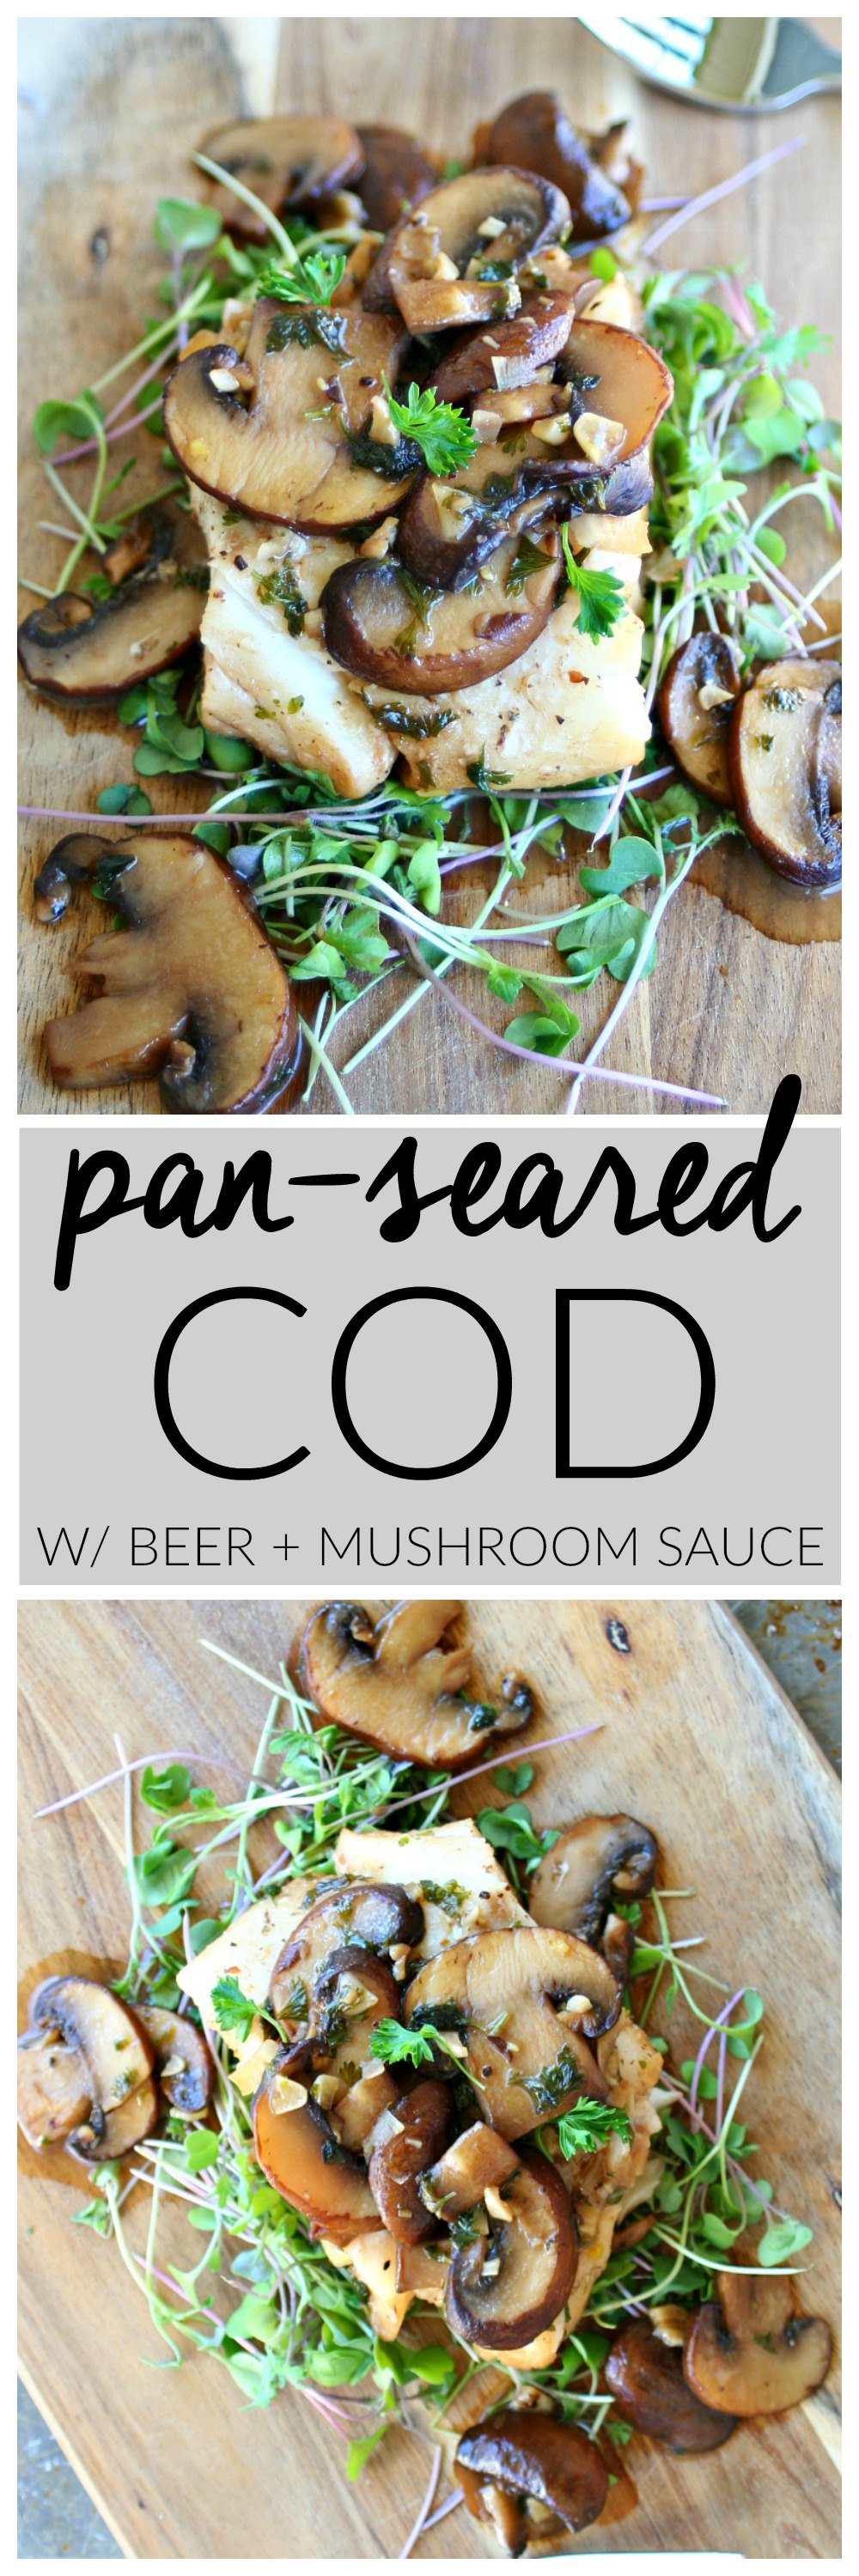 Pan-Seared Cod With Beer and Mushroom Sauce | Killing Thyme